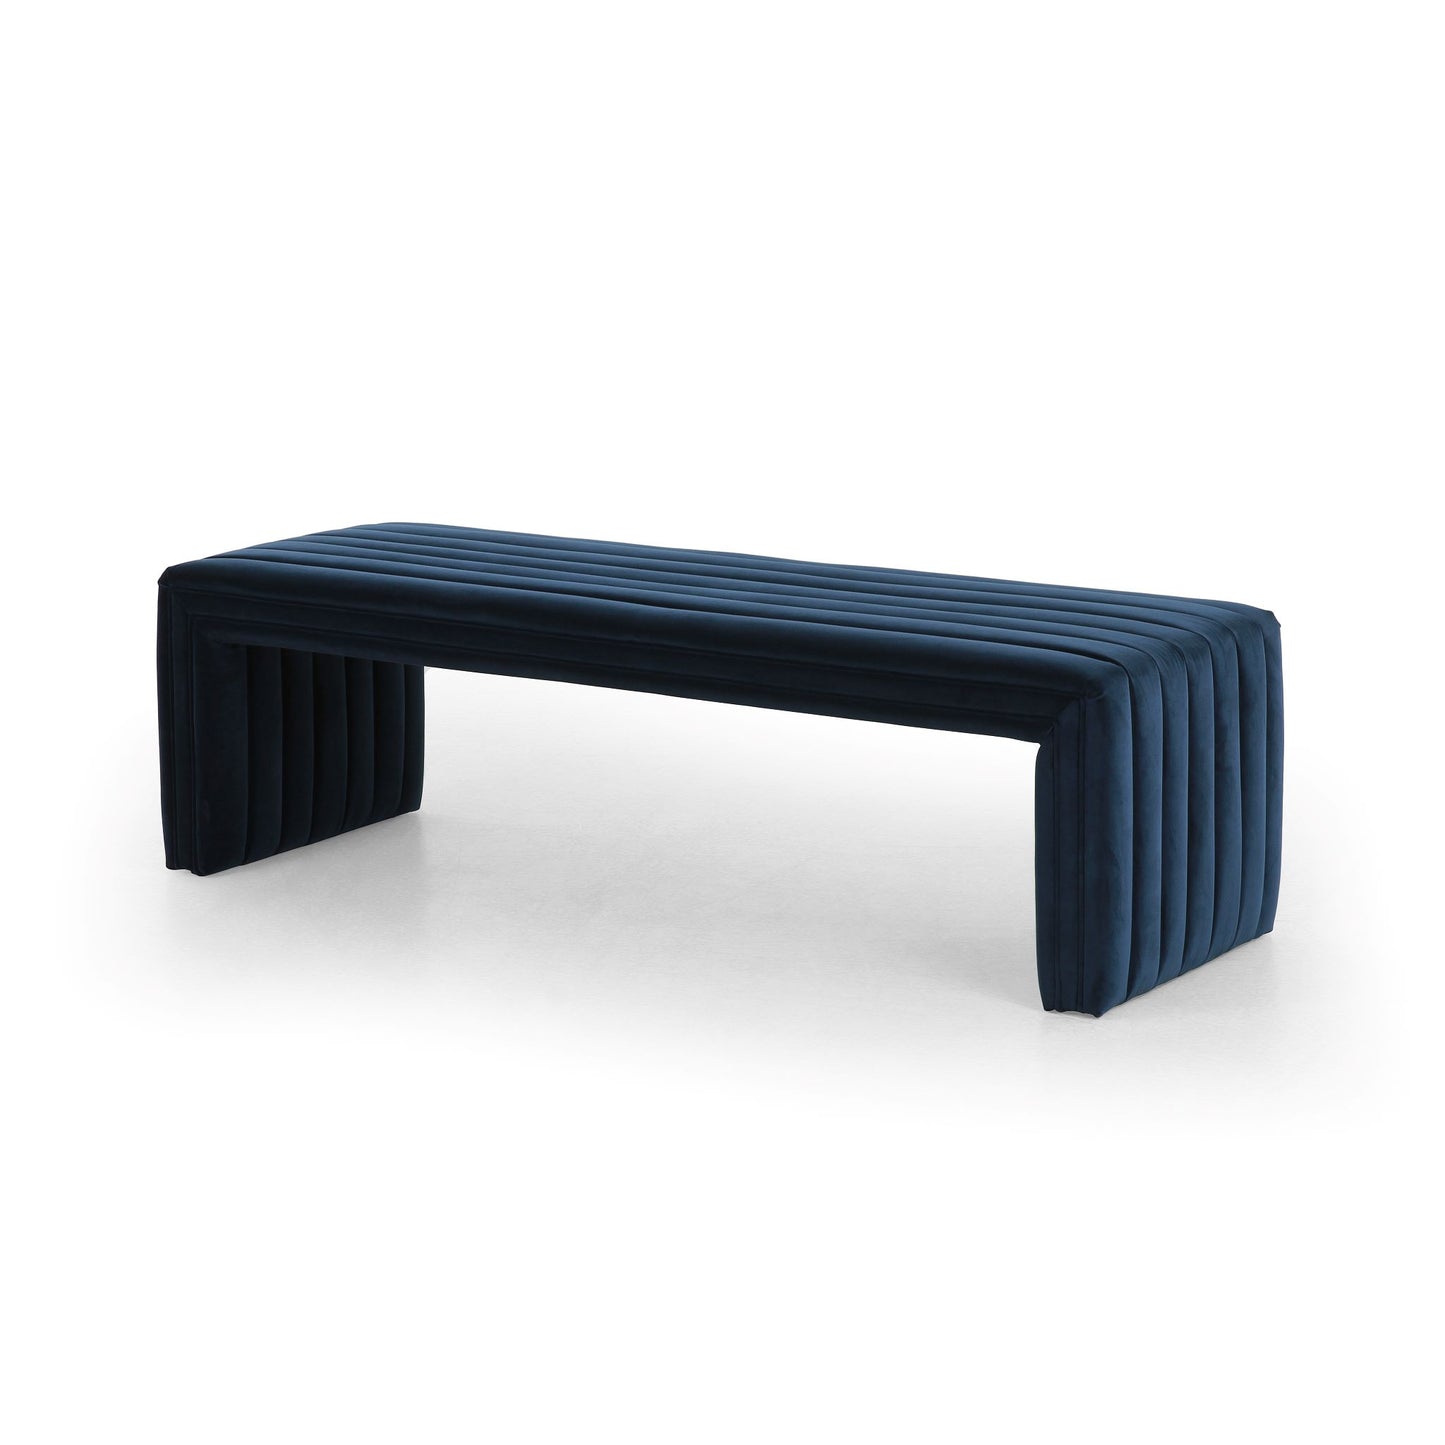 Augustine Bench Sapphire NavyBench Four Hands  Sapphire Navy   Four Hands, Mid Century Modern Furniture, Old Bones Furniture Company, Old Bones Co, Modern Mid Century, Designer Furniture, https://www.oldbonesco.com/